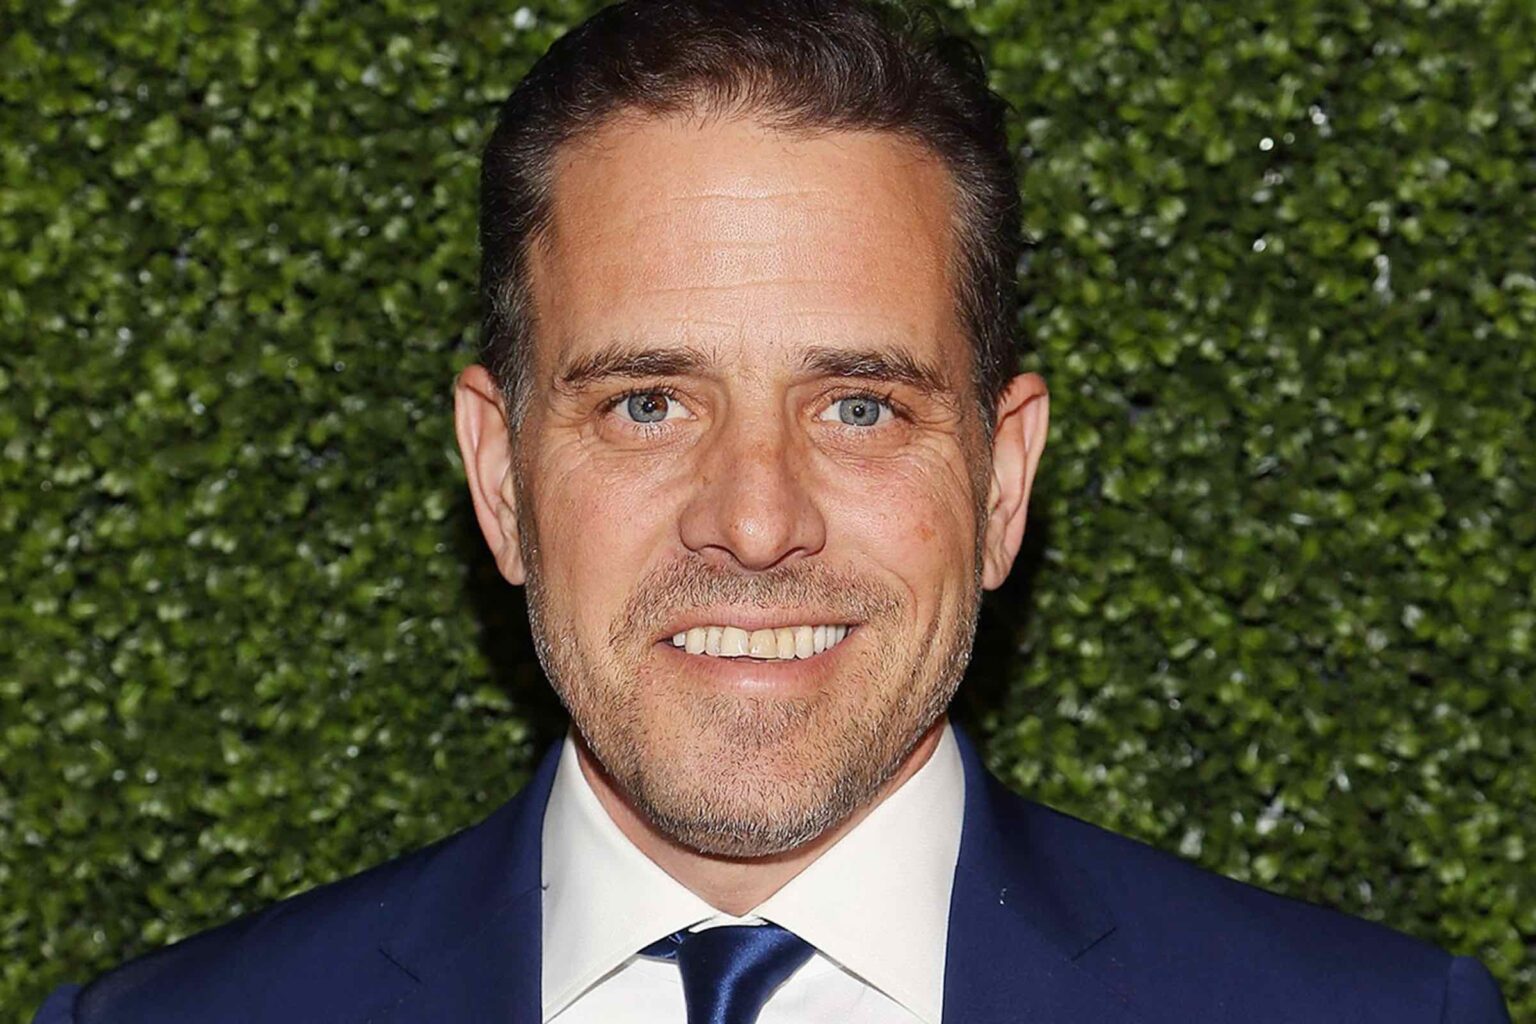 Hunter Biden is passing through tax-related problems. Recently, ex-girlfriend Zoe Kestan testified in front of a jury. What's next for the president's son?